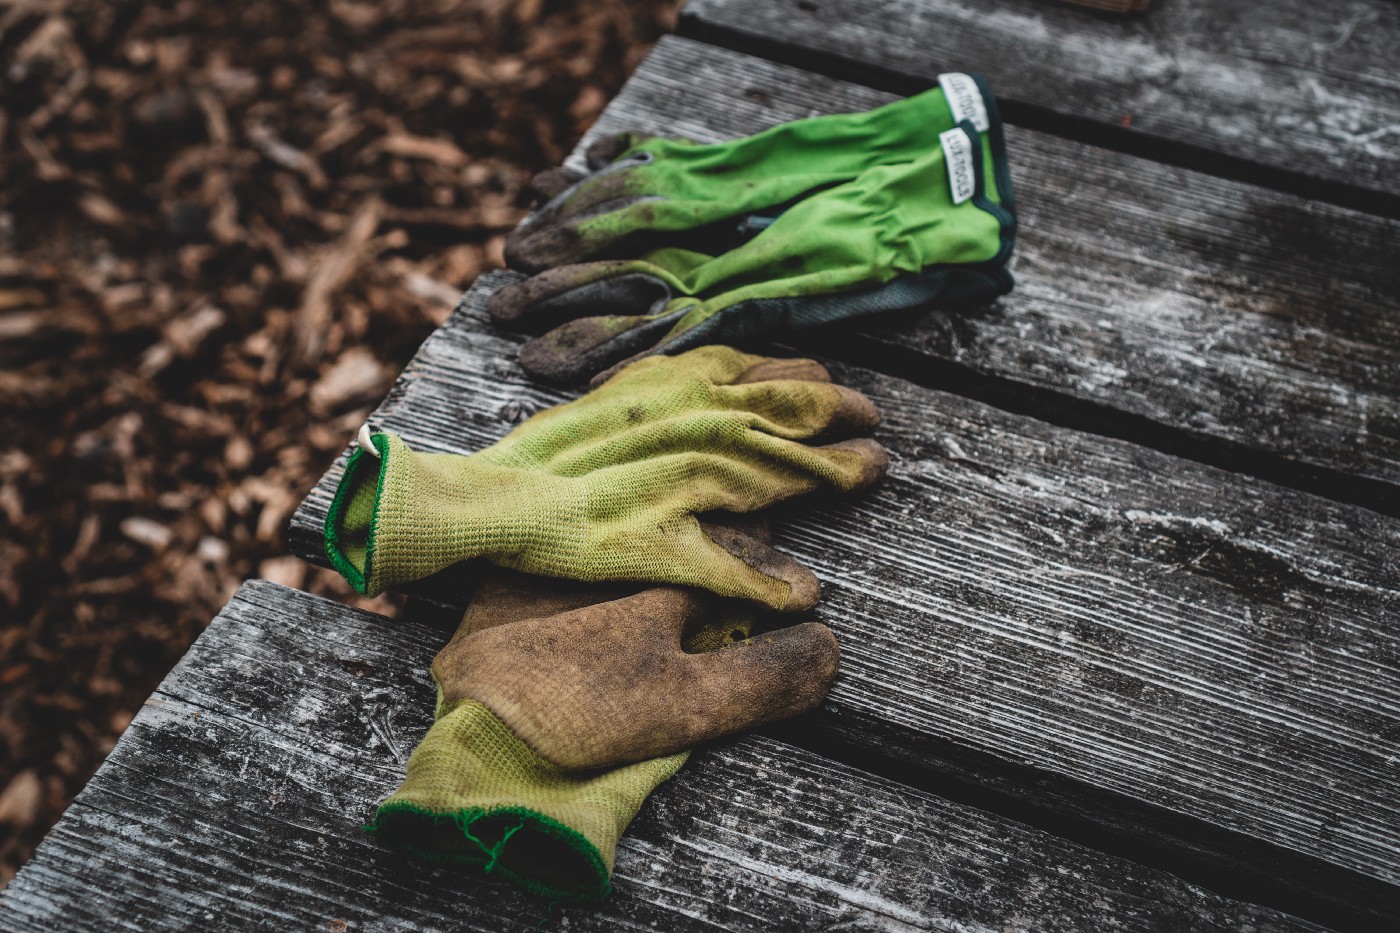 Two pairs of dirty gardening gloves on a wooden surface.